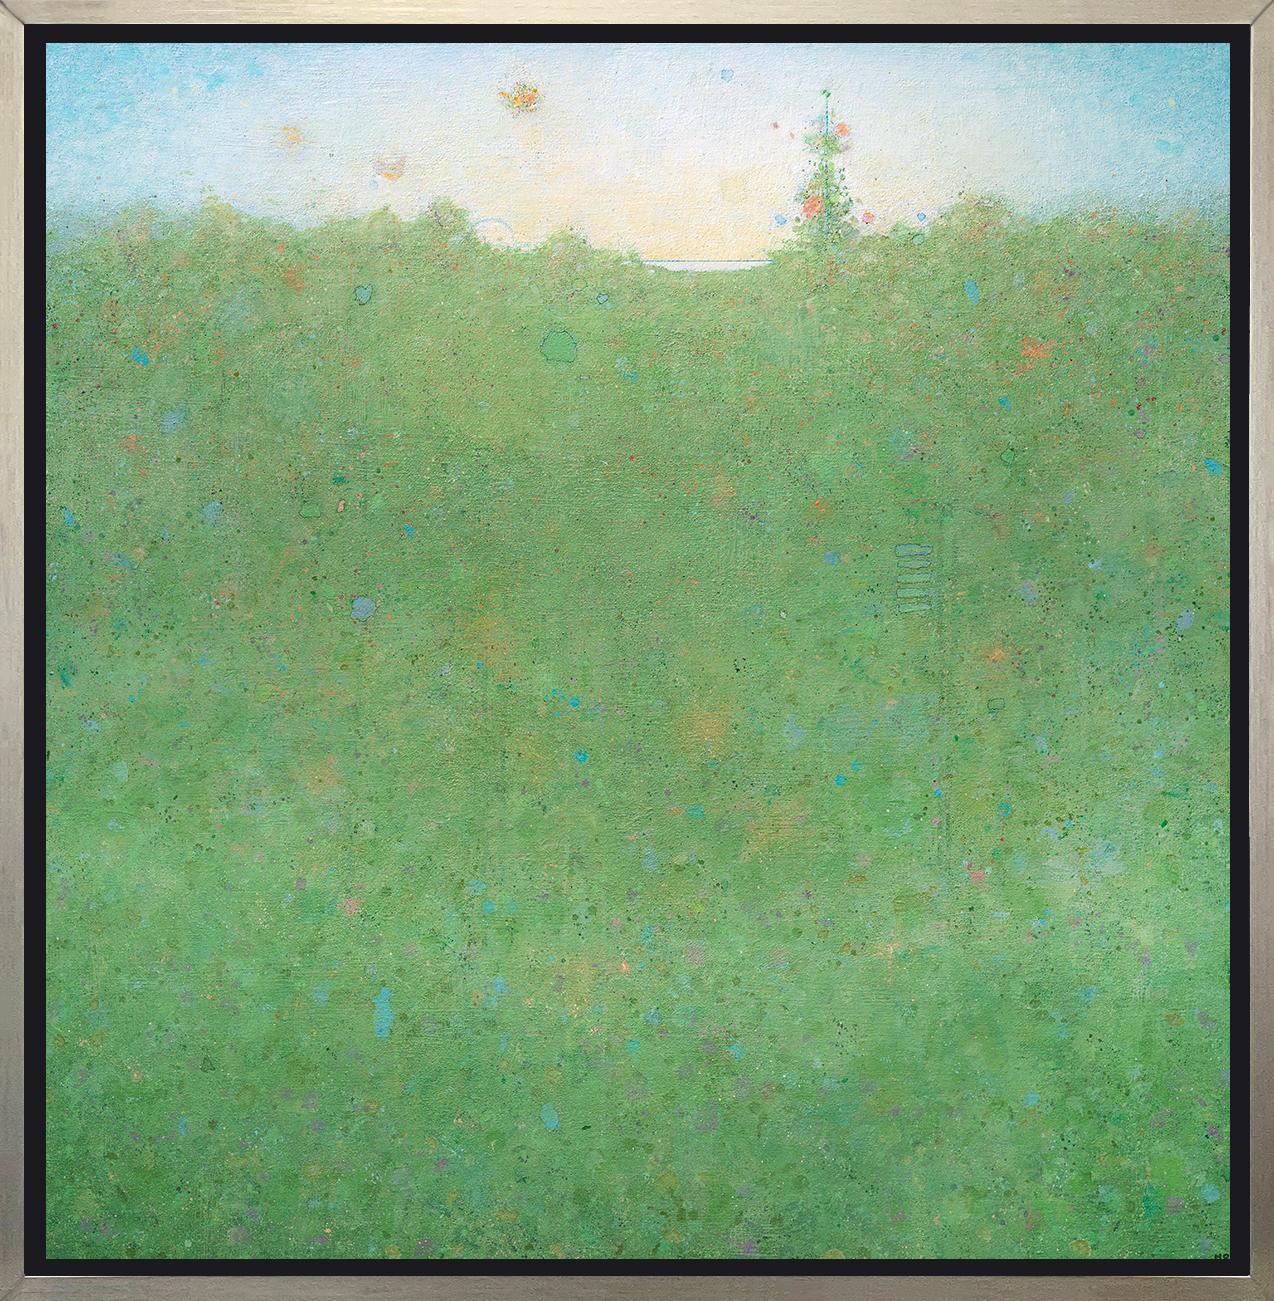 Elwood Howell Abstract Print - "Springtime, " Framed Limited Edition Giclee Print, 30" x 30"